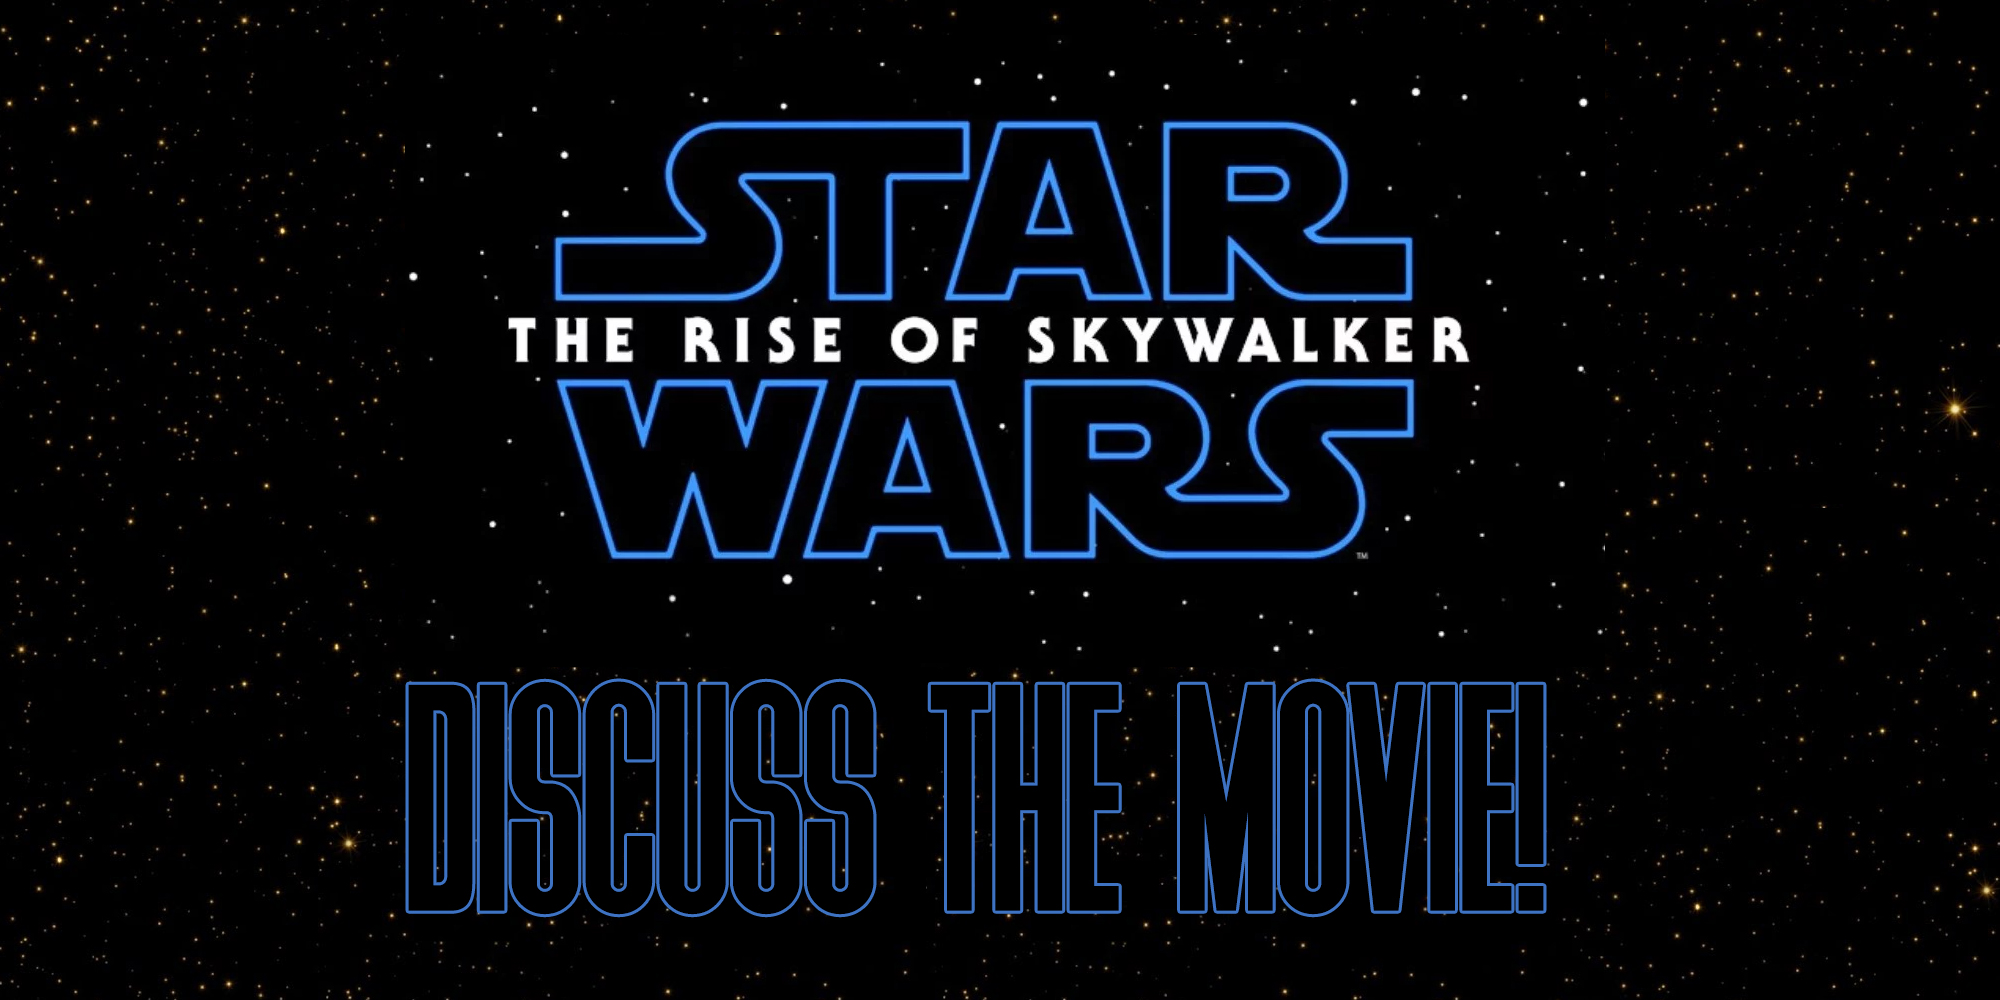 Discuss The Rise Of Skywalker!